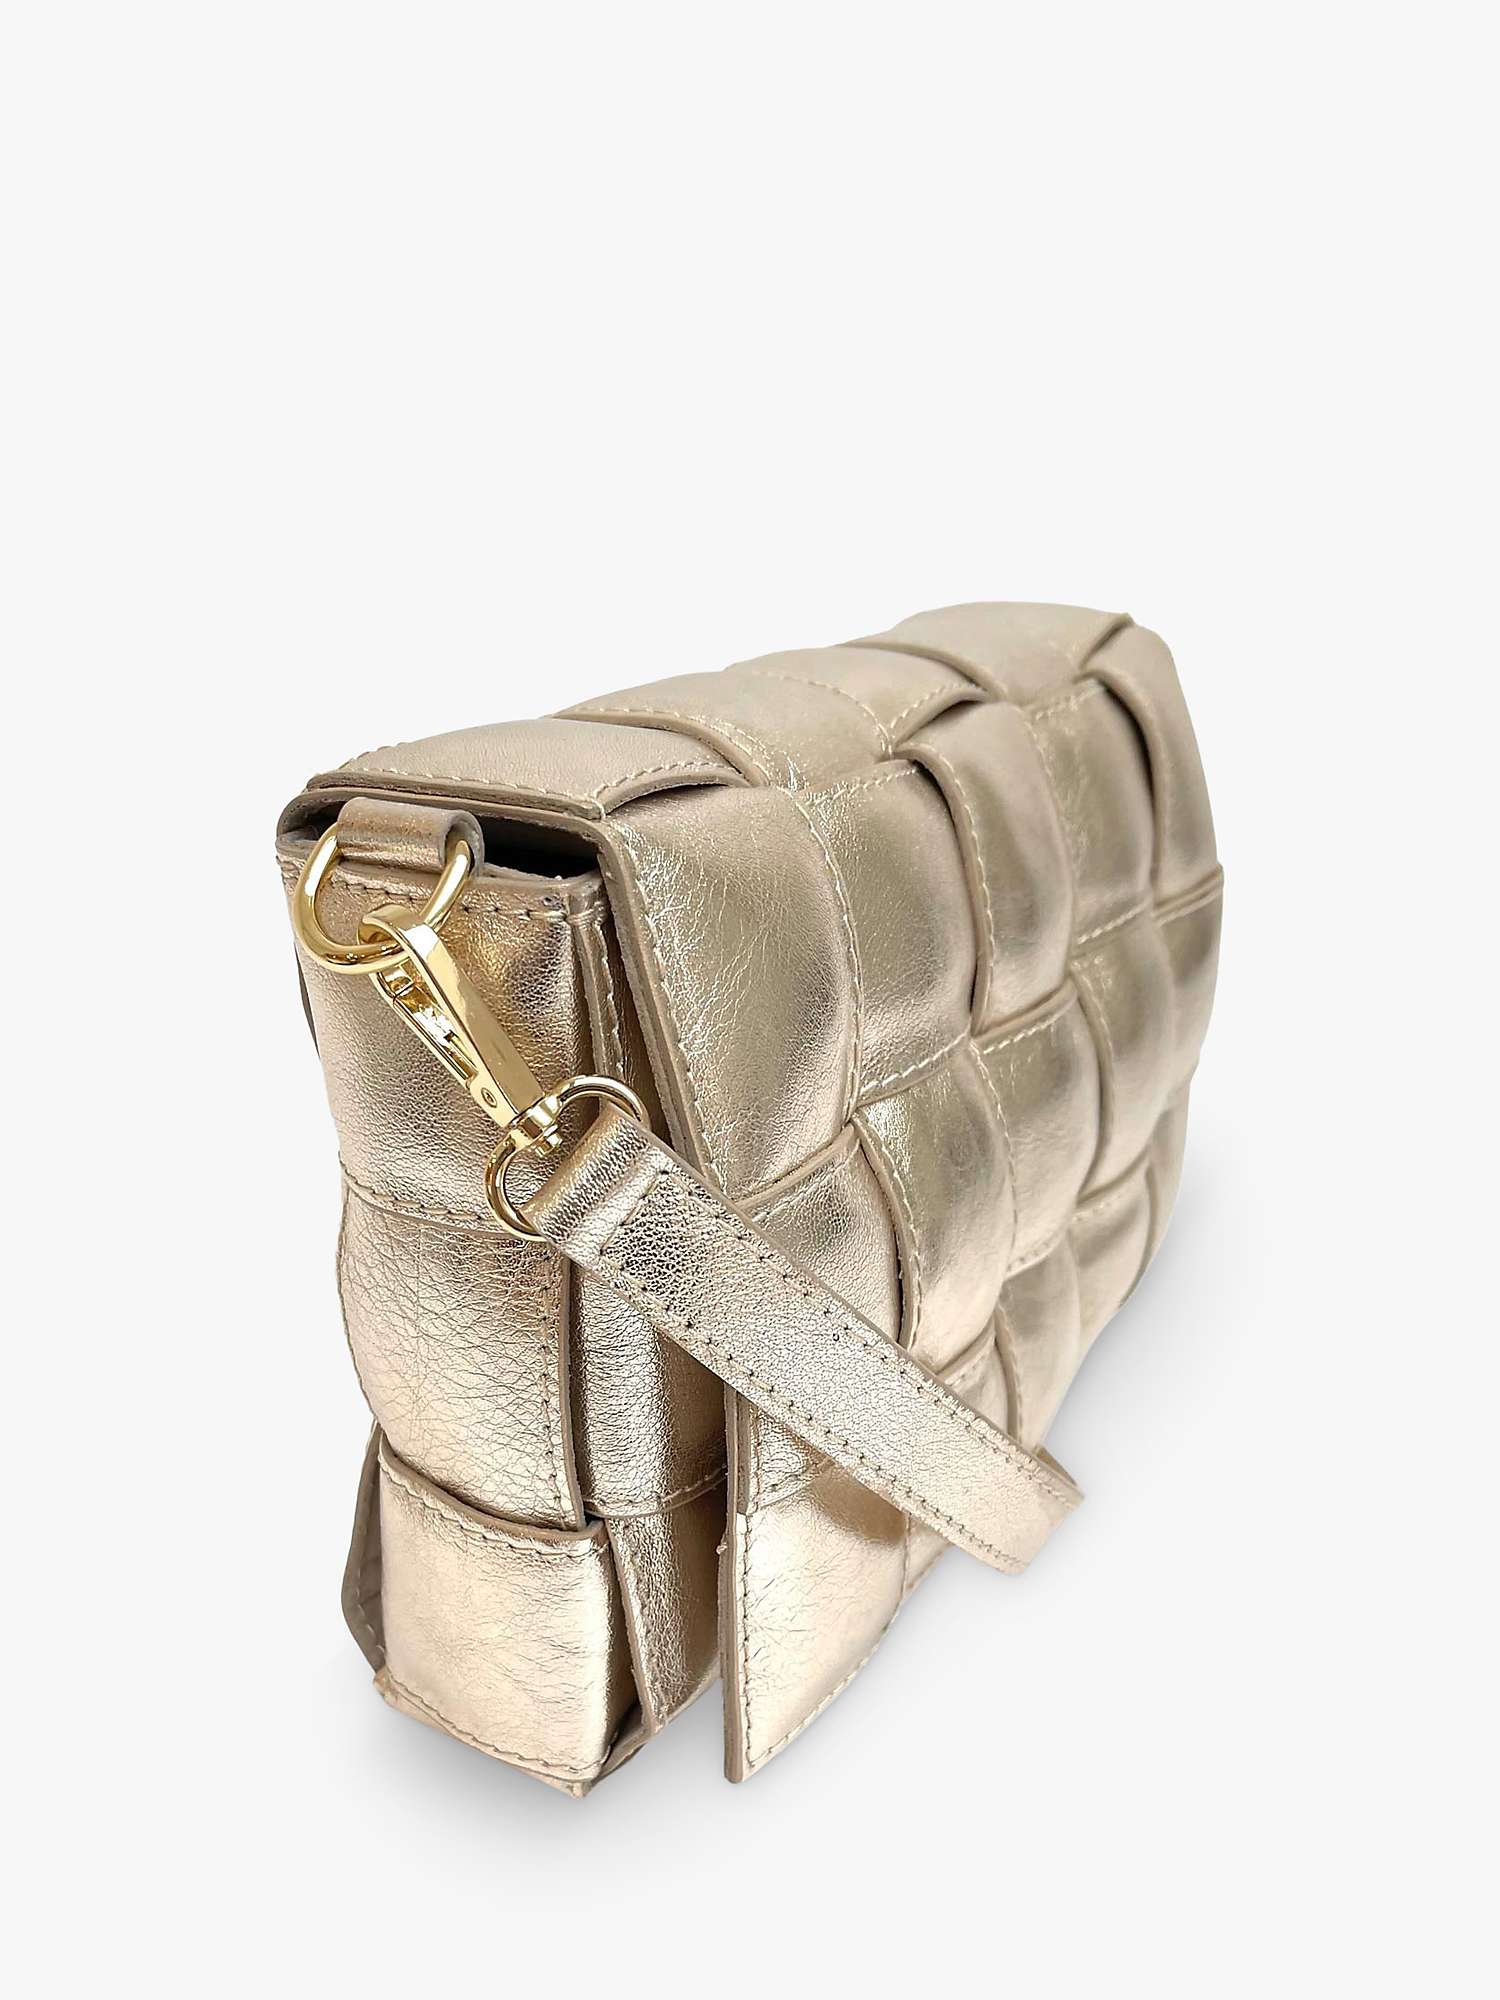 Buy Apatchy Padded Woven Leather Crossbody Bag Online at johnlewis.com